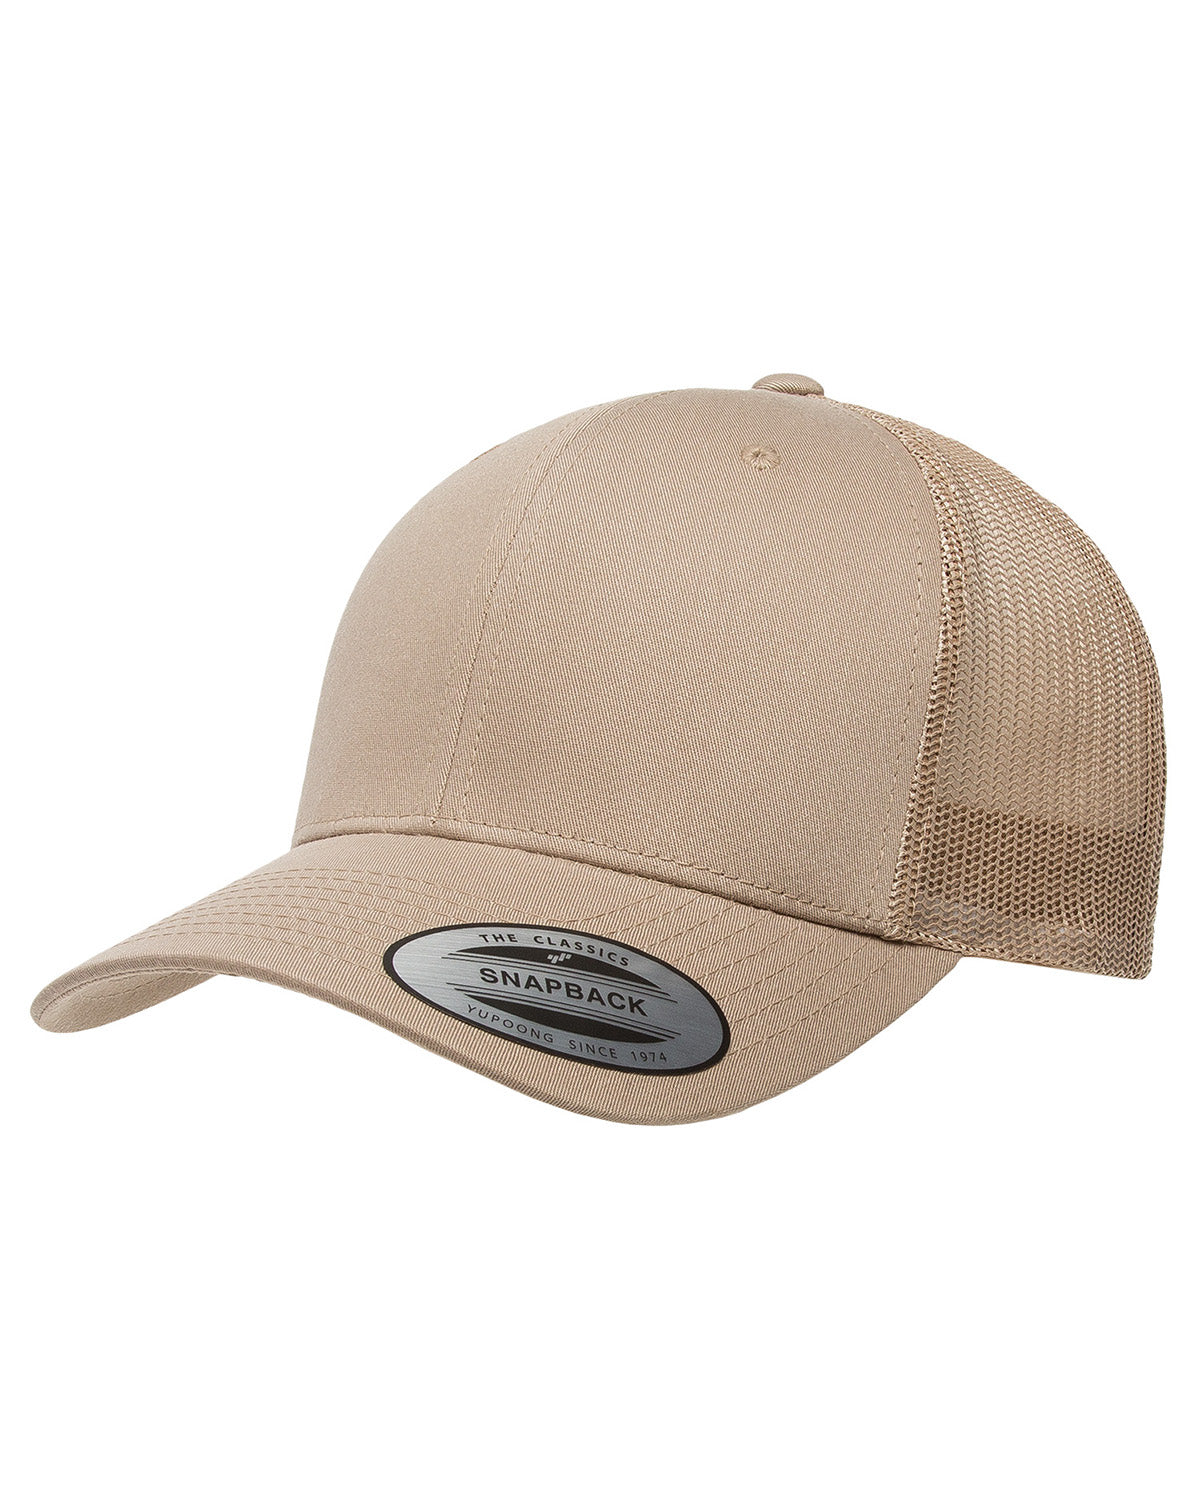 Cheap Affordable Custom Hats Caps Custom Leather and Wood Patches Engraved With Your Logo Hats Black Yupoong Khaki Flexfit Hats